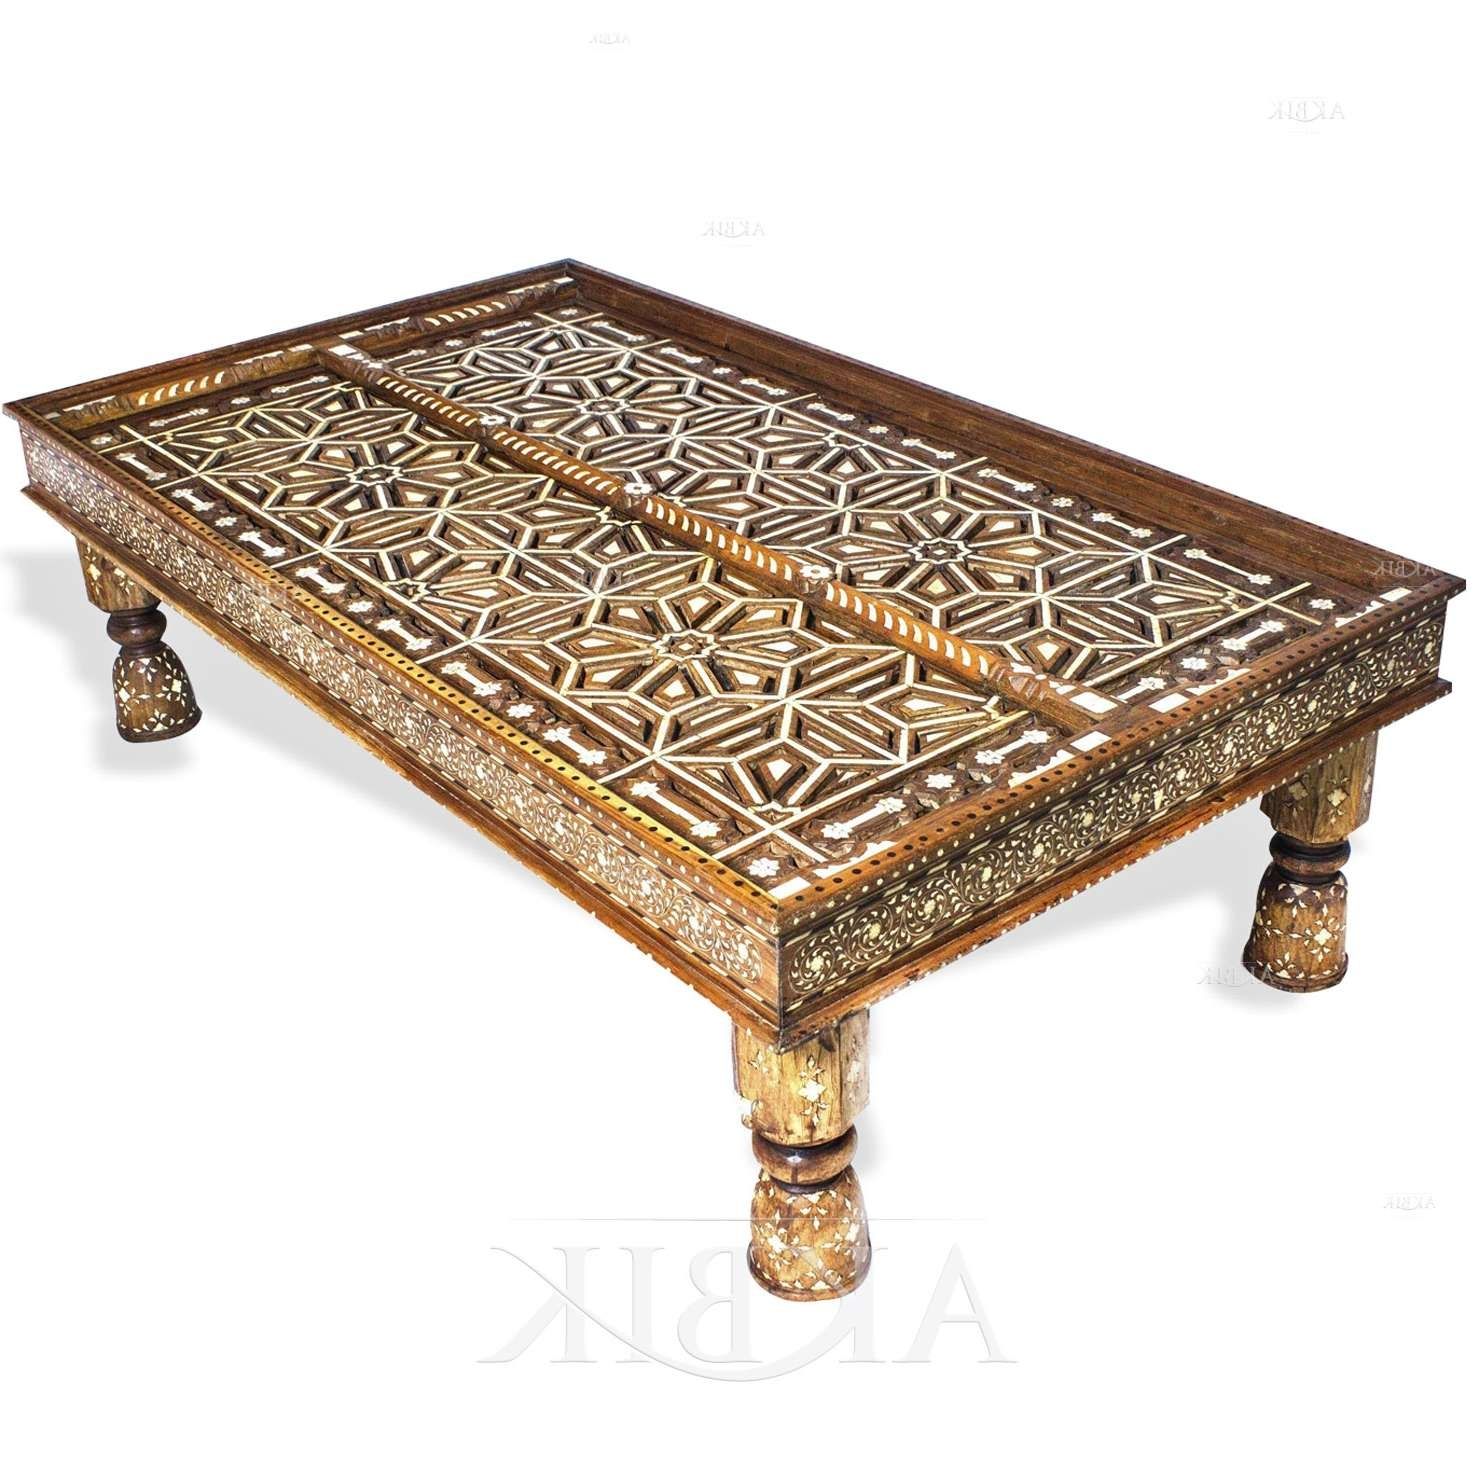 Popular Indian Coffee Tables Pertaining To Mediterranean, Levantine & Syrian Furniture Inlaid With Mother Of (View 1 of 20)